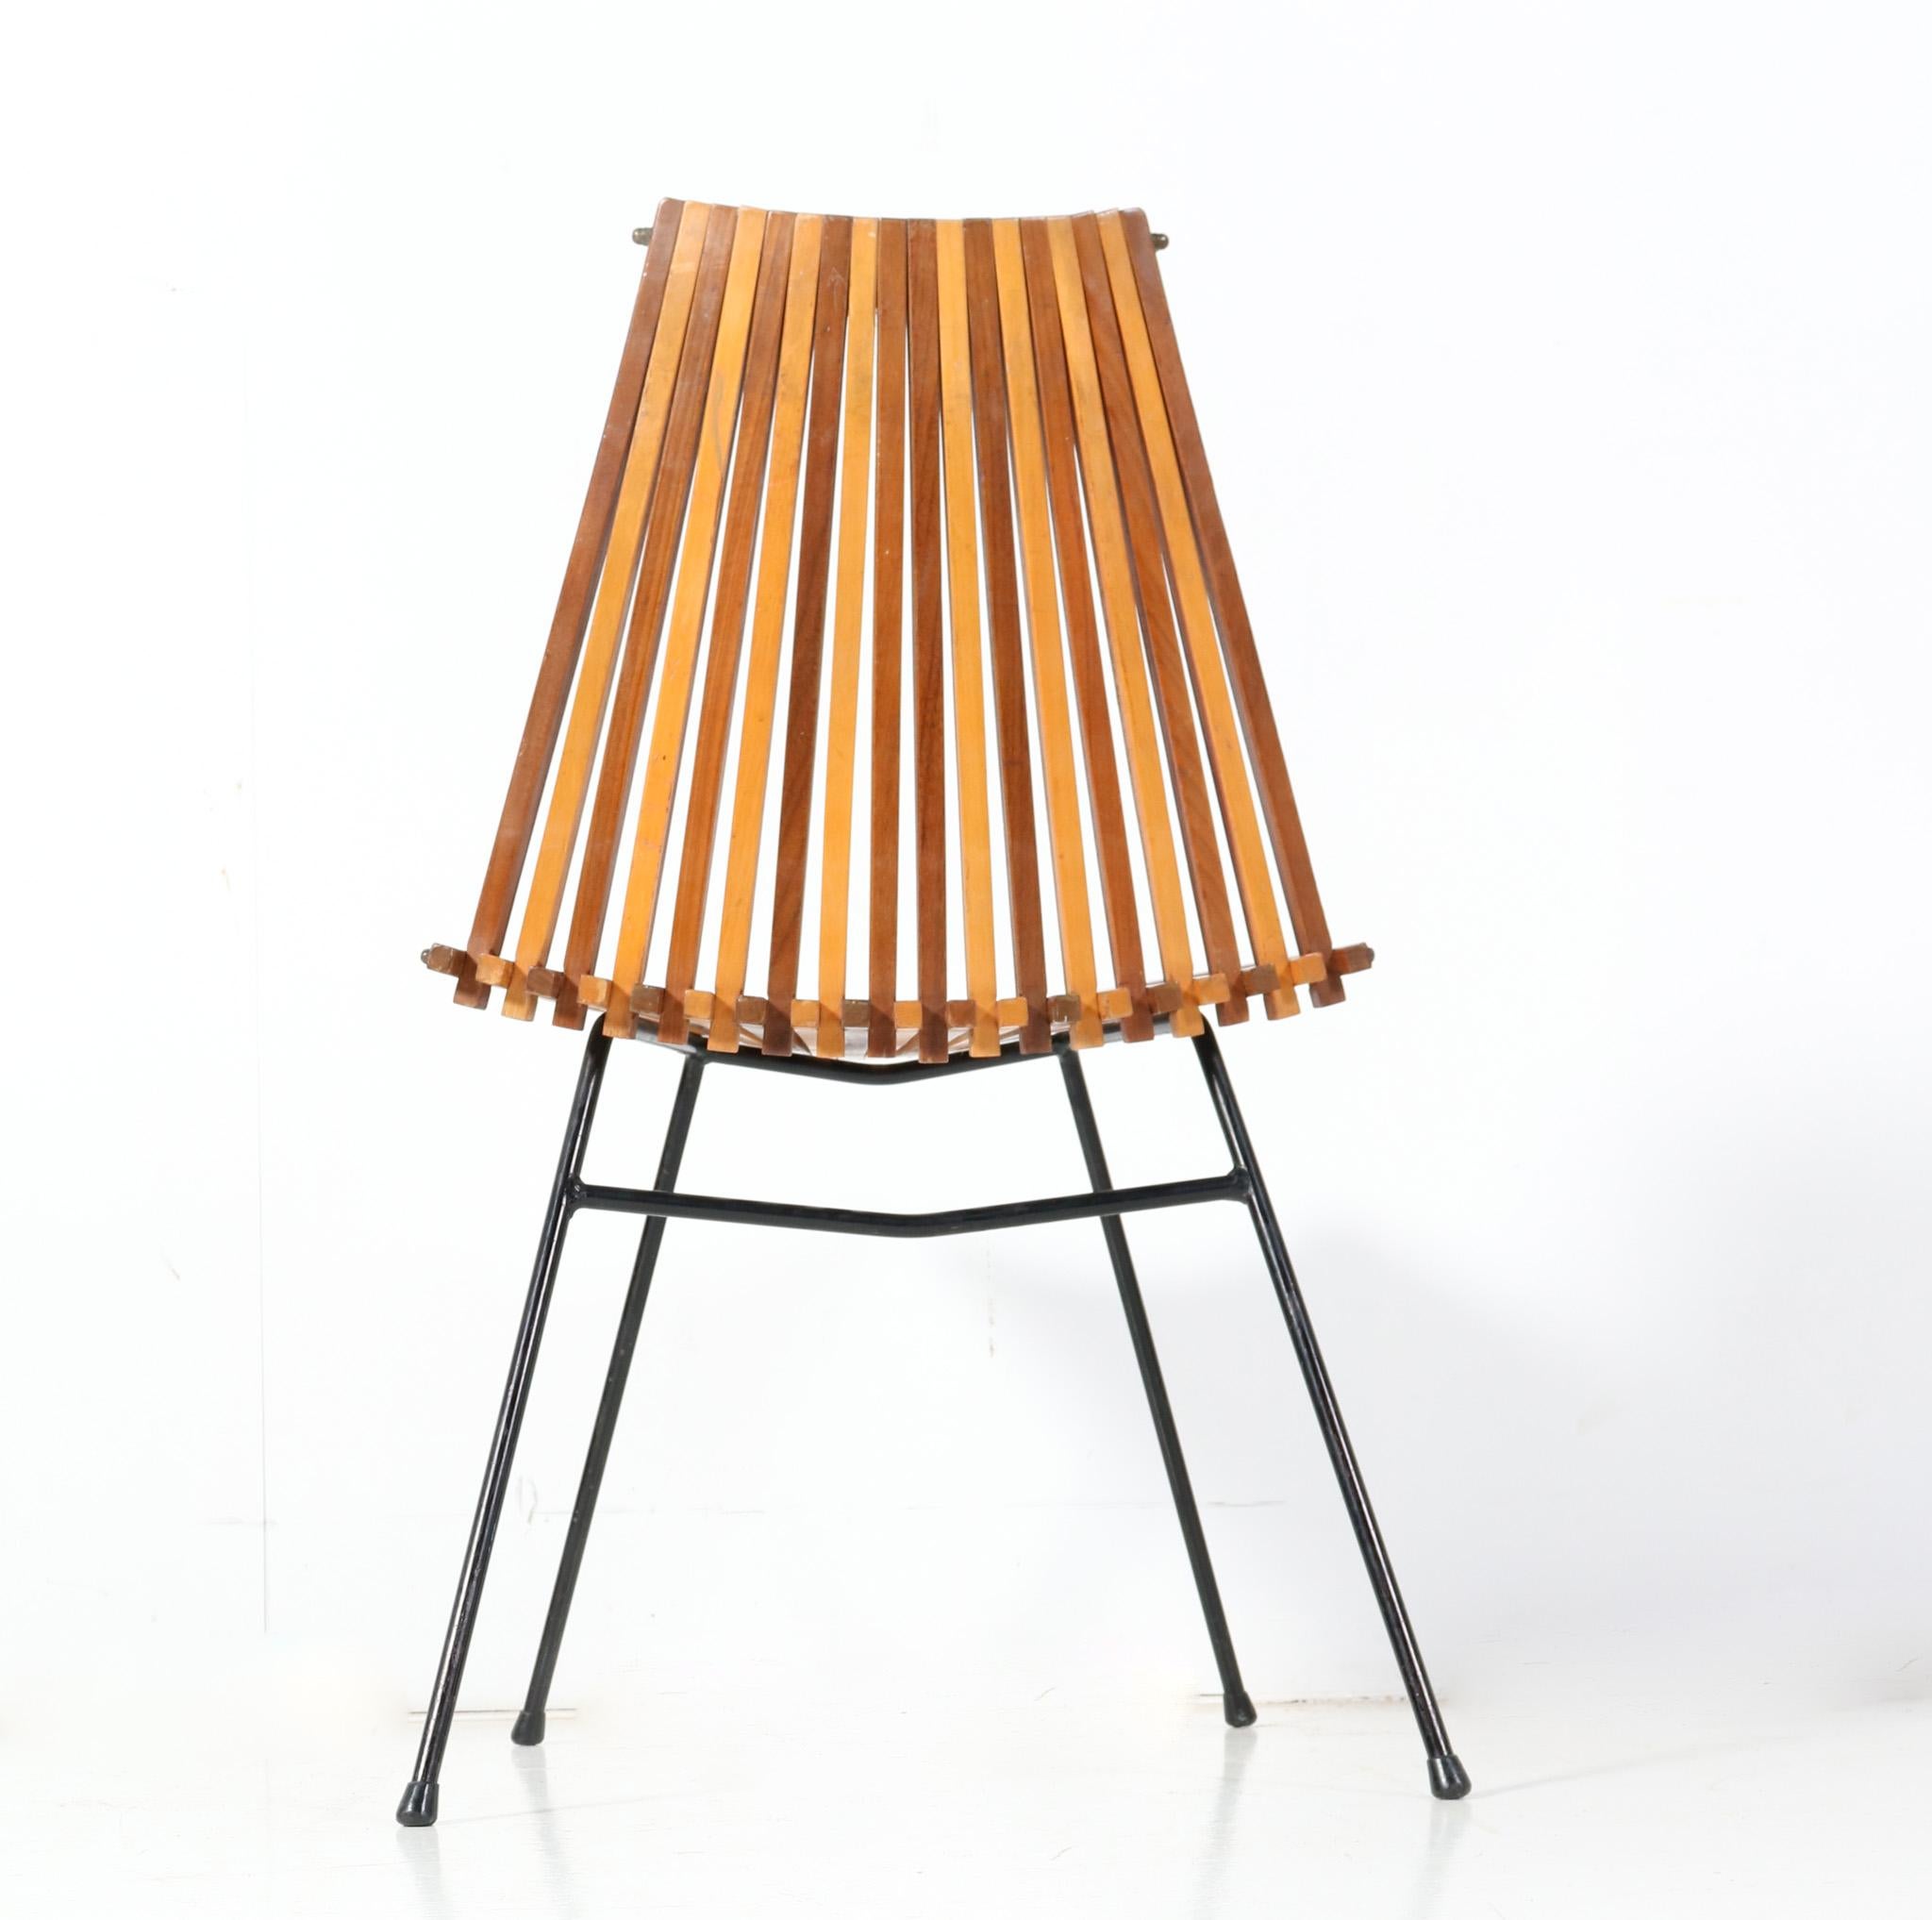 Mid-20th Century Mid-Century Modern Model 218 Side Chair by Dirk van Sliedregt for Rohé, 1961 For Sale